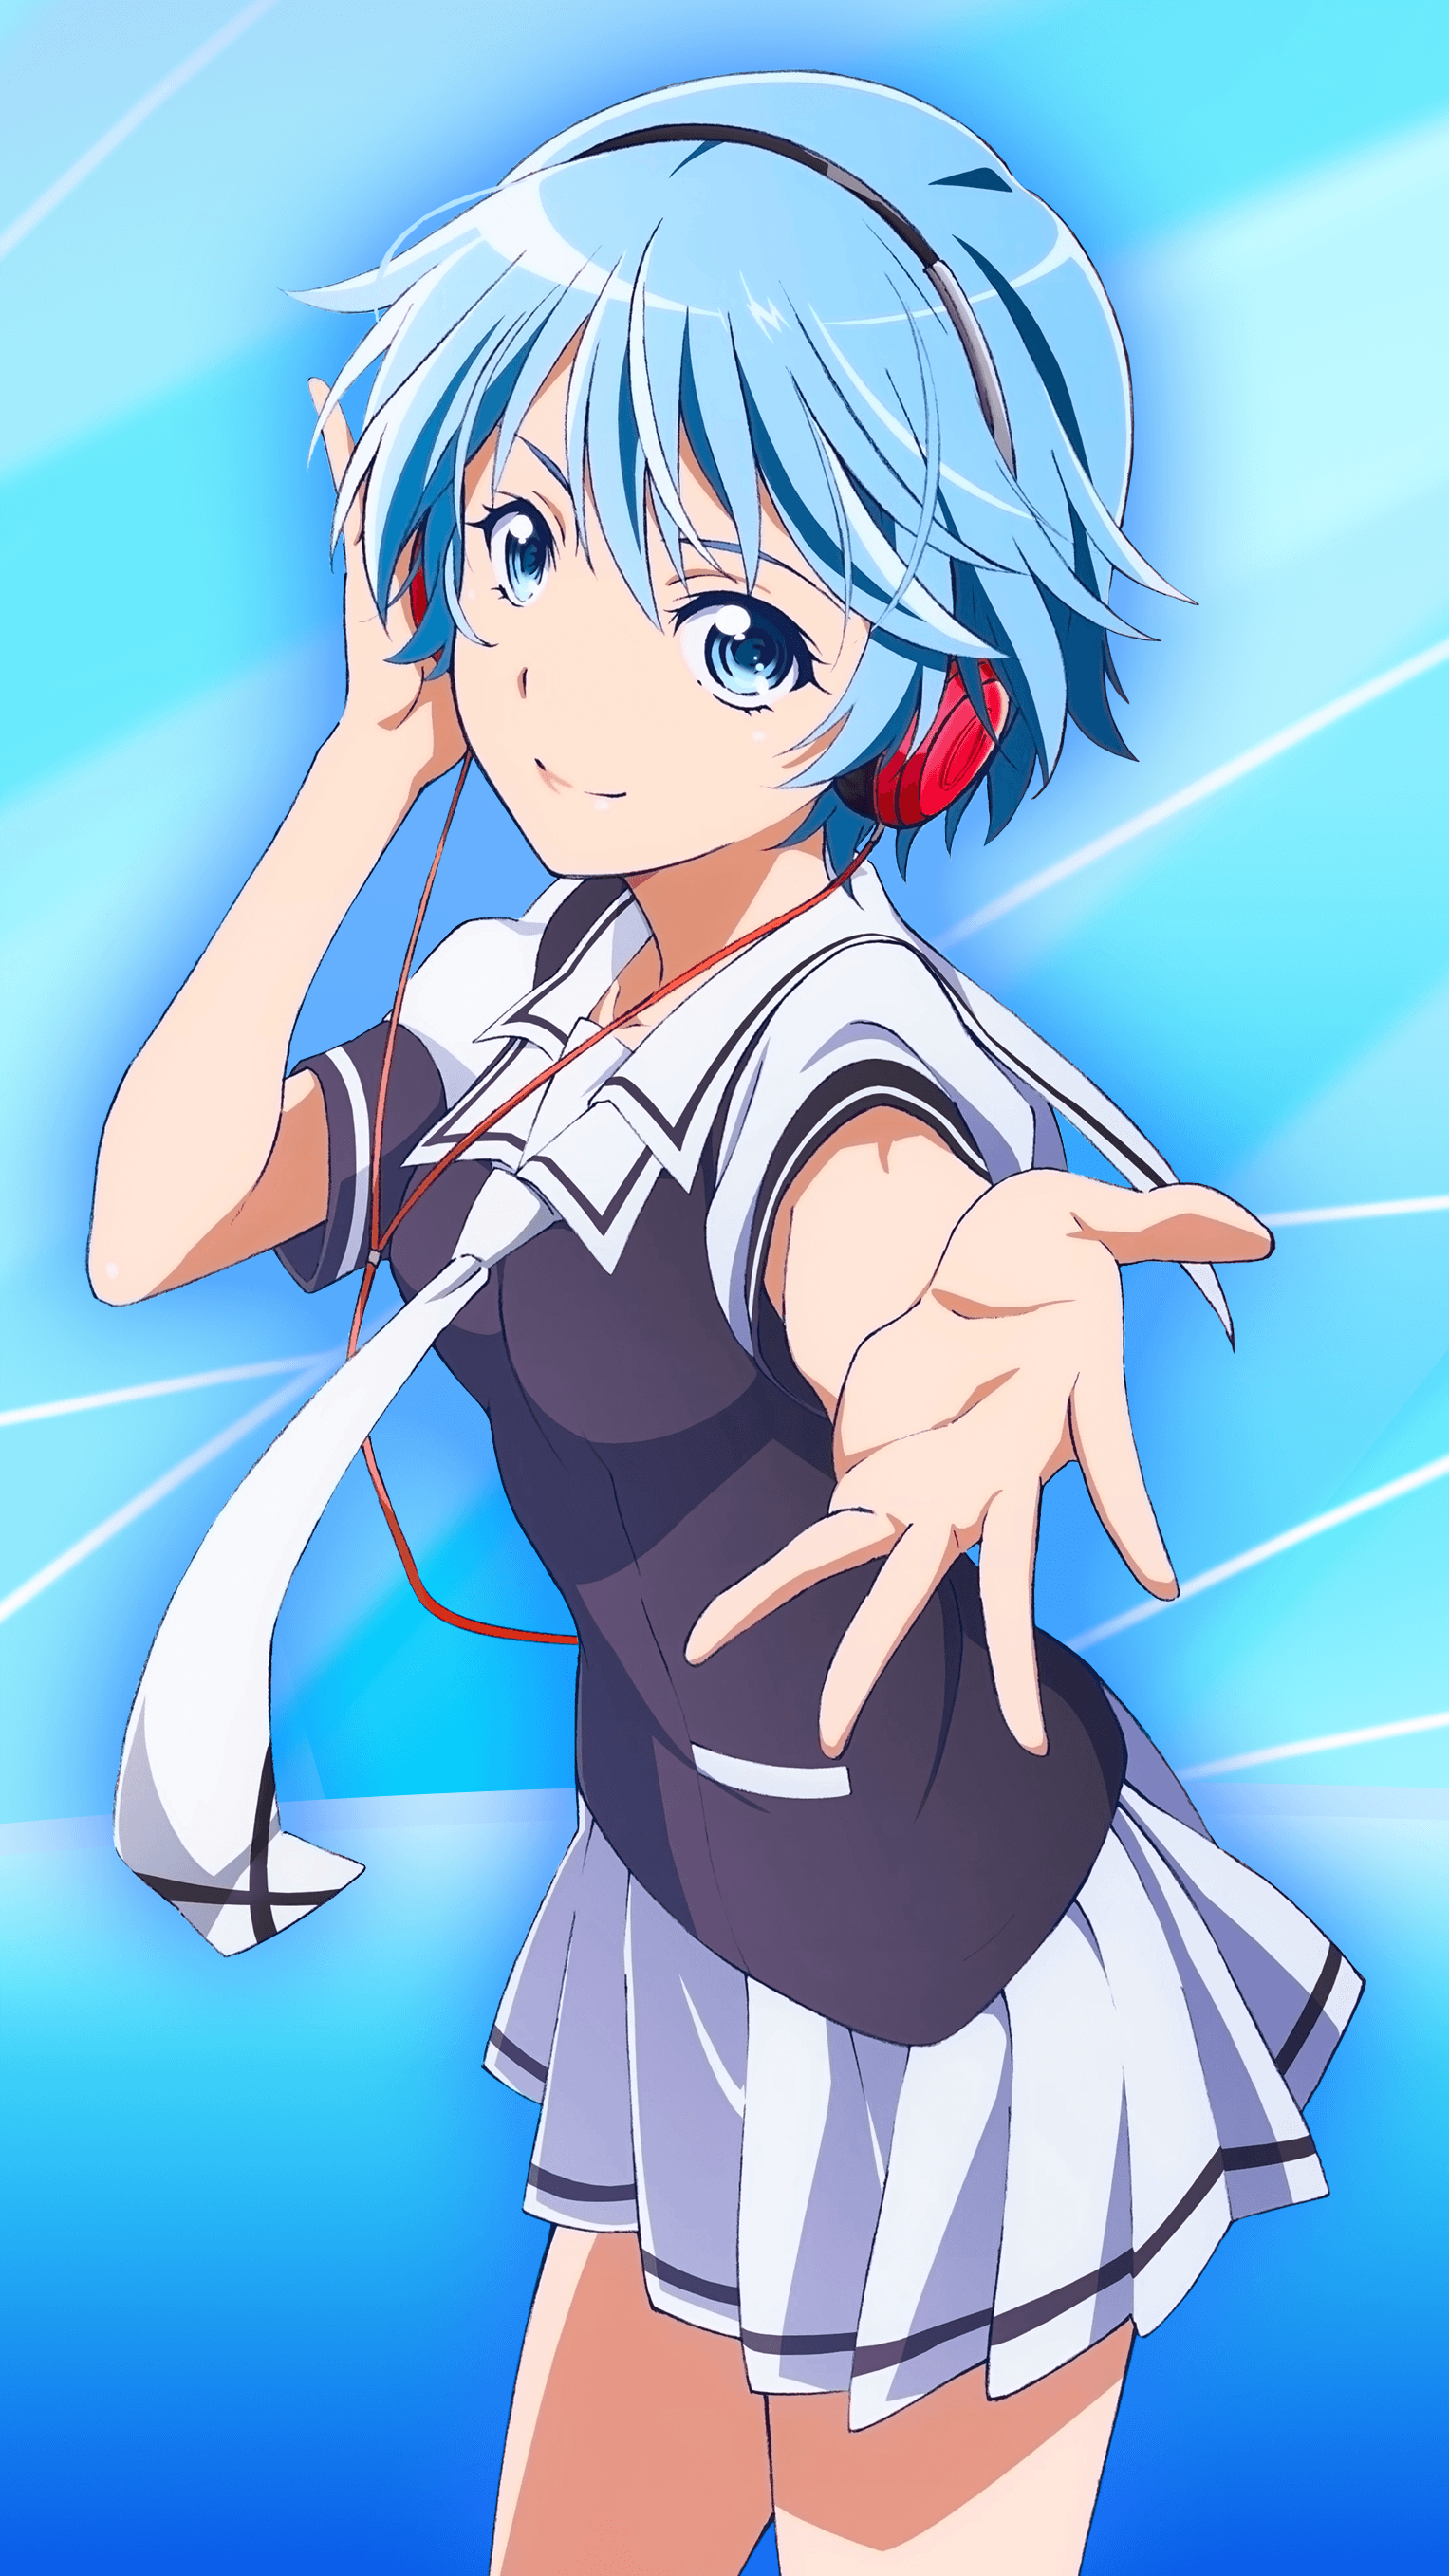 Made a P4U Fuuka wallpaper in the stile of that series of Persona 4 Arena  wallpapers : r/PERSoNA